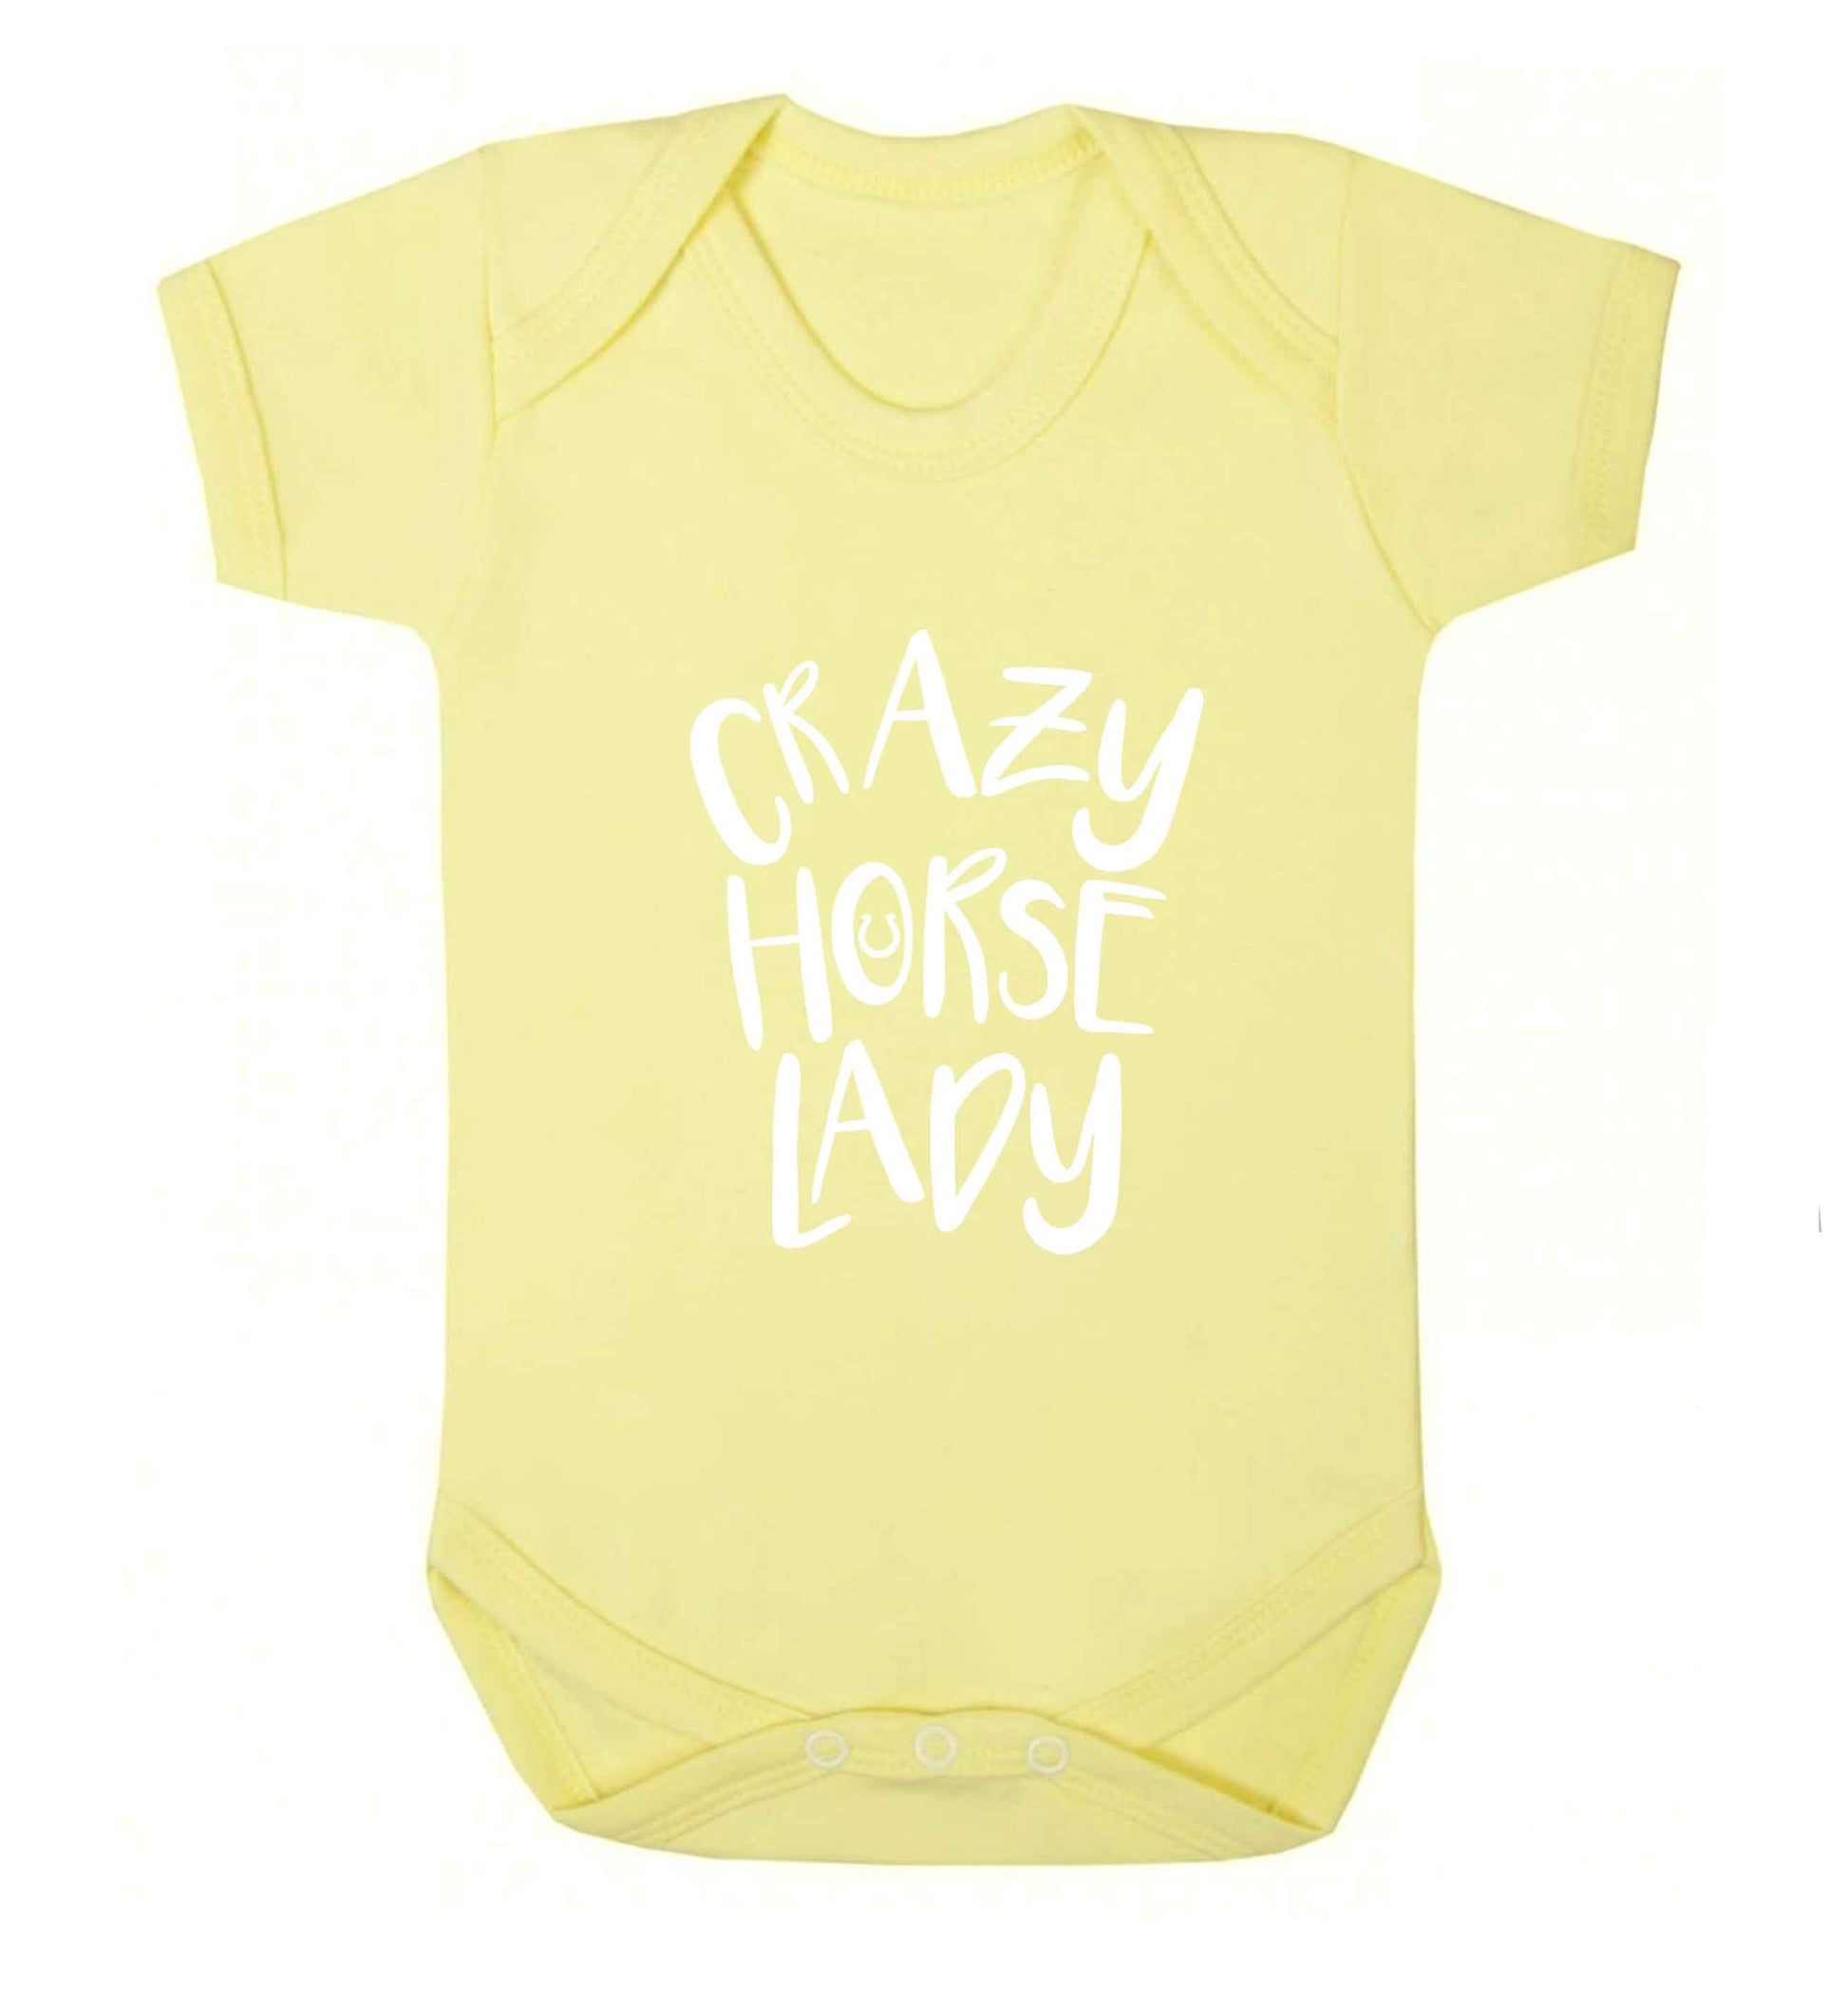 Crazy horse lady baby vest pale yellow 18-24 months